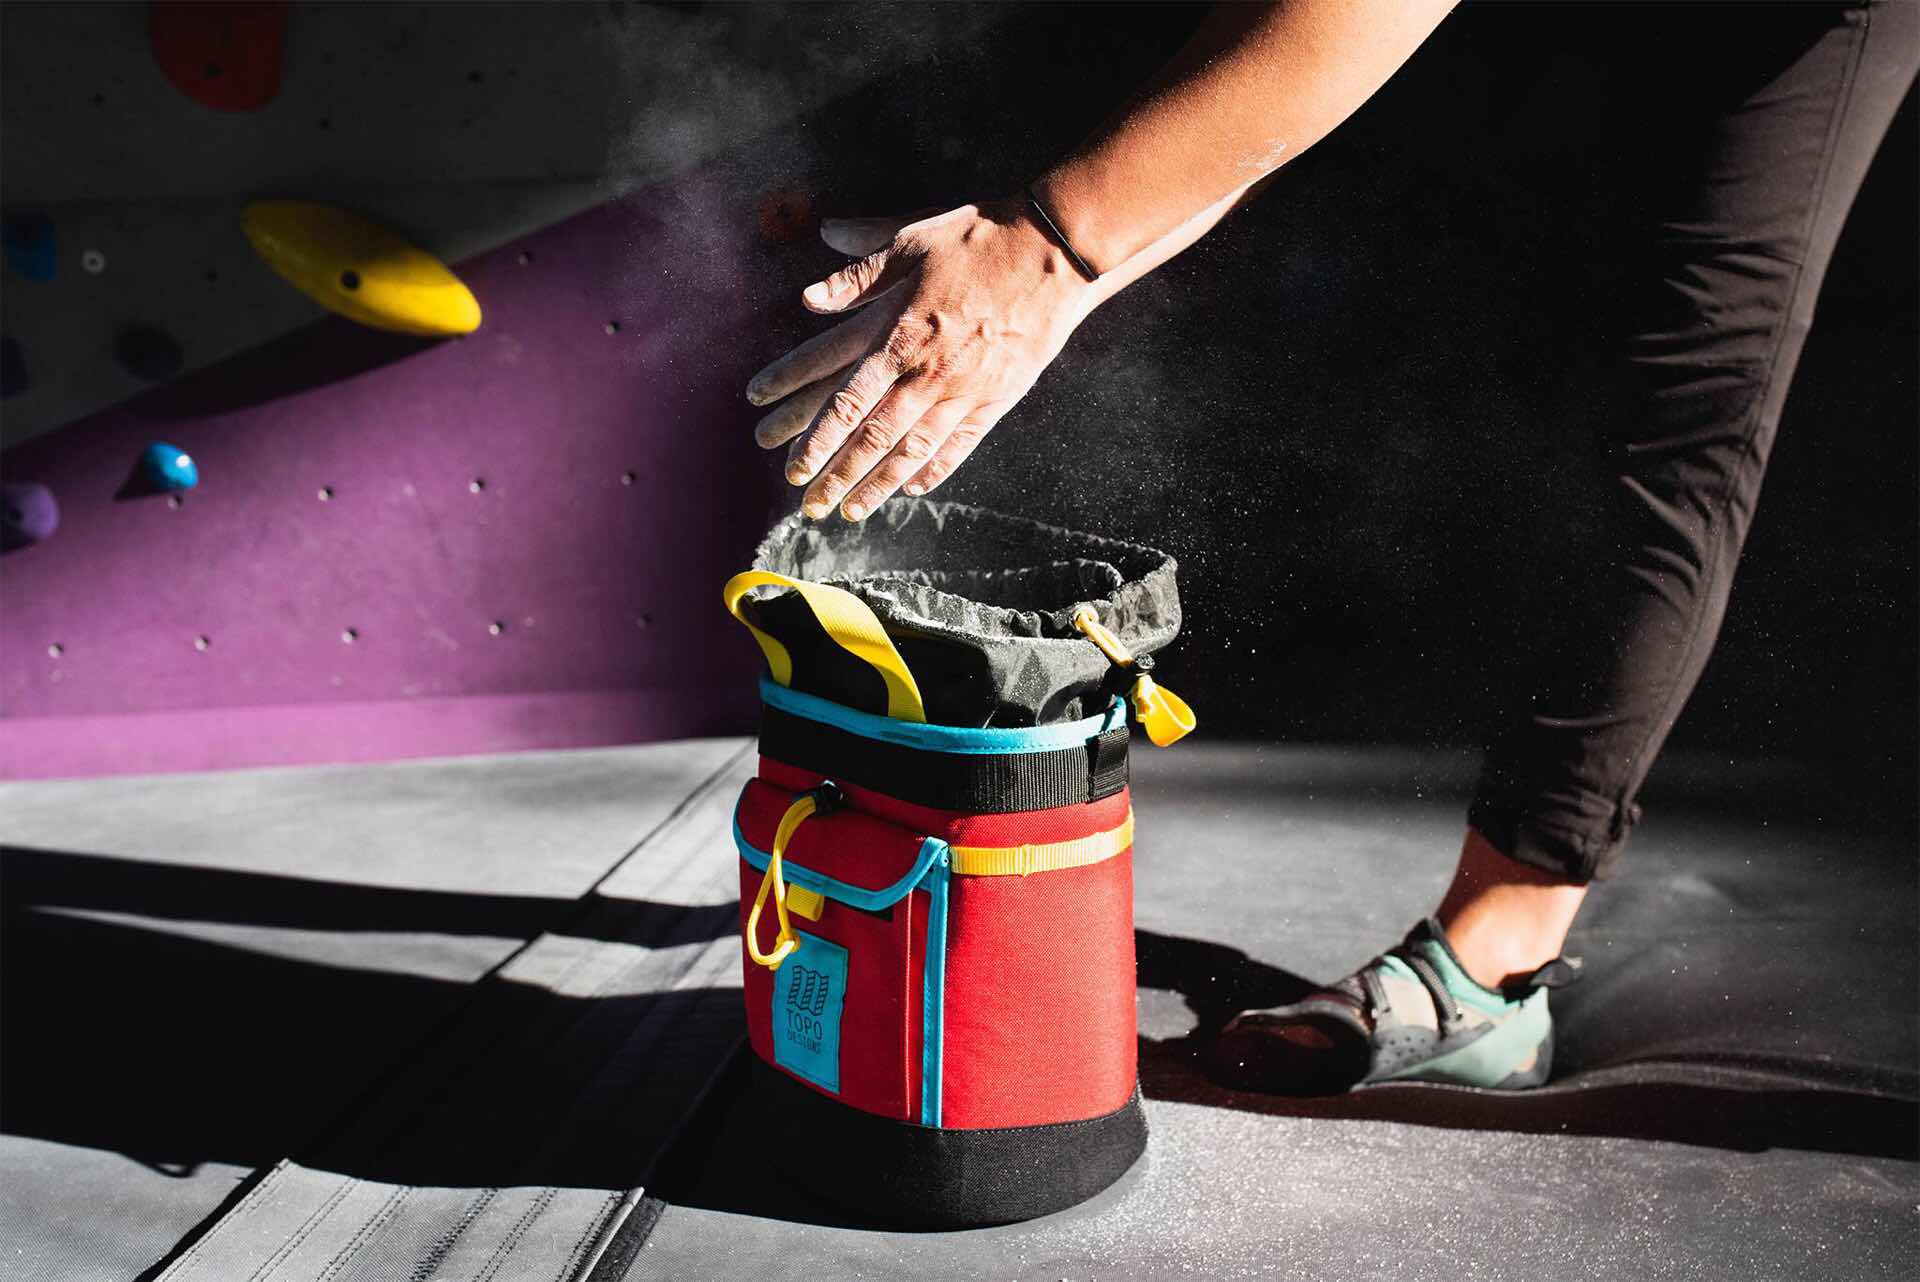 Topo Designs chalk bag. ($43 for either red/black or [white/turquoise](https://www.amazon.com/dp/B07G5HDPSP?tag=toolsandtoys-20))